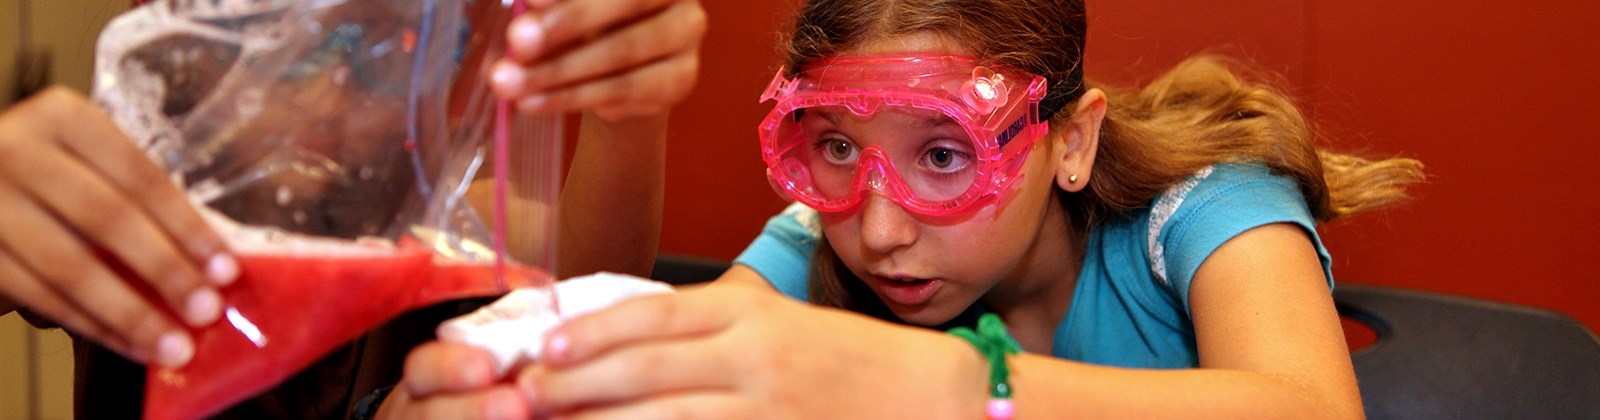 Young girl wearing protective googles working on a science experiment